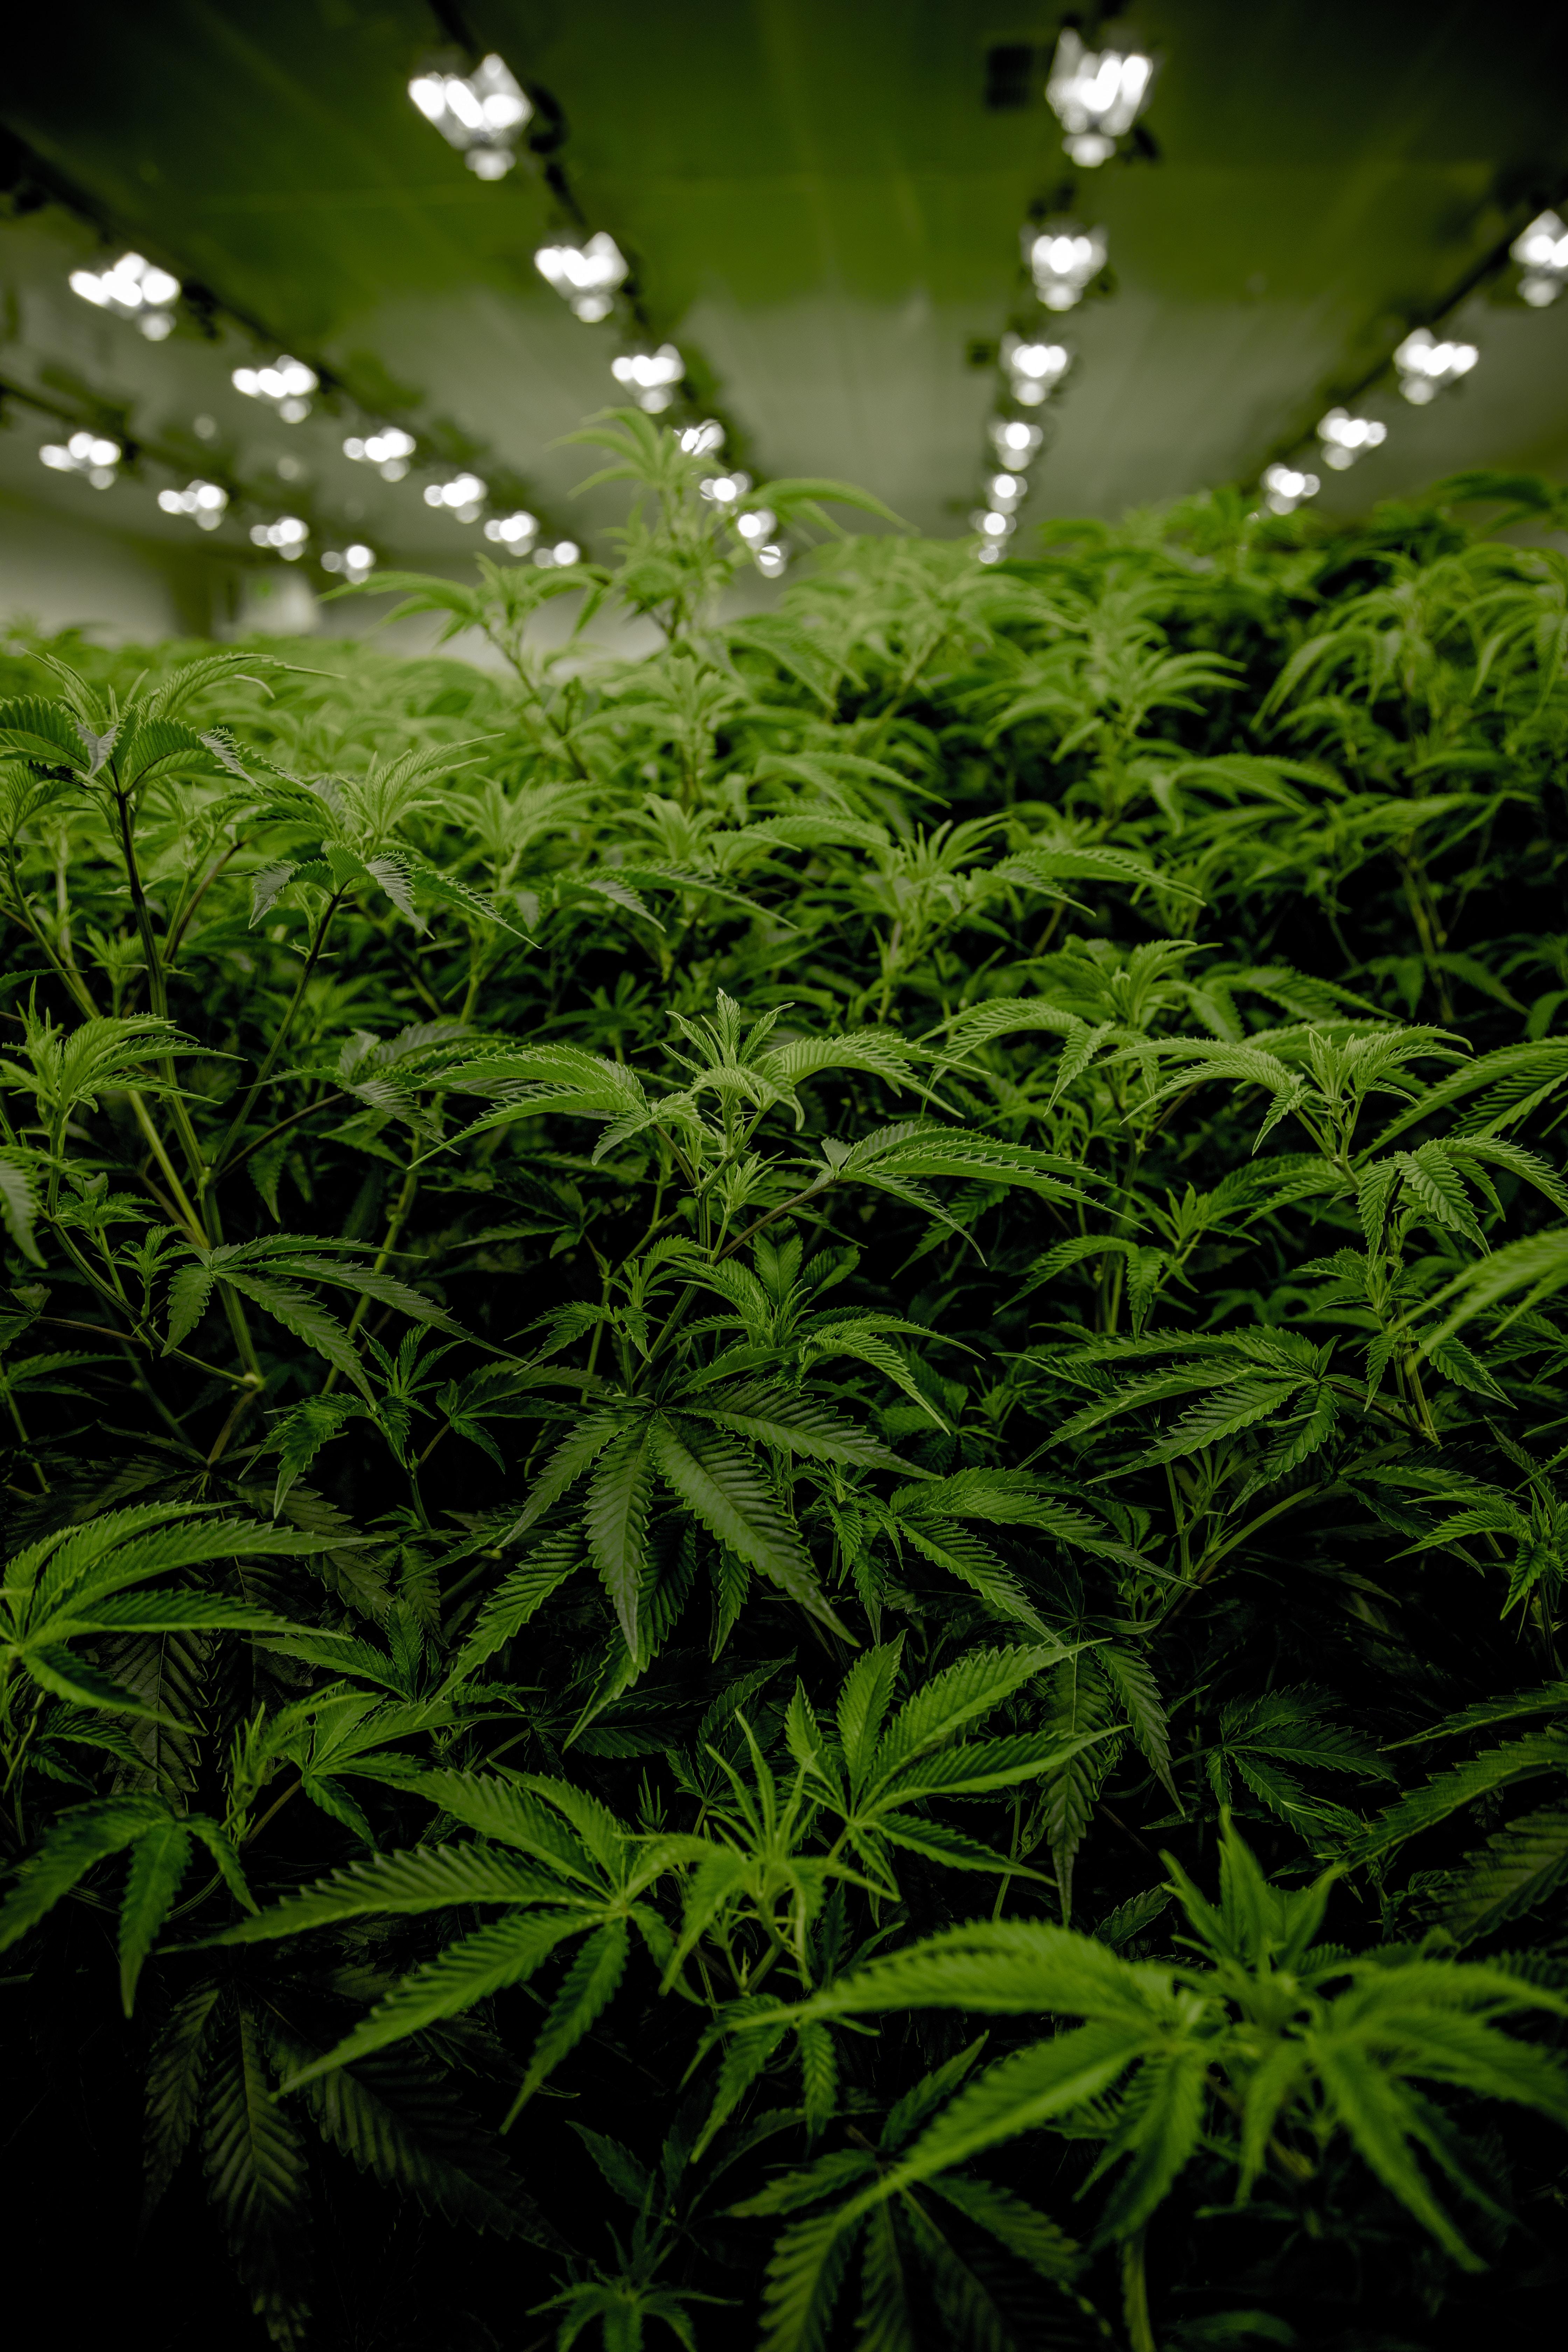 The U.S. The Department of Health has eased weed restrictions with a marijuana recommendation